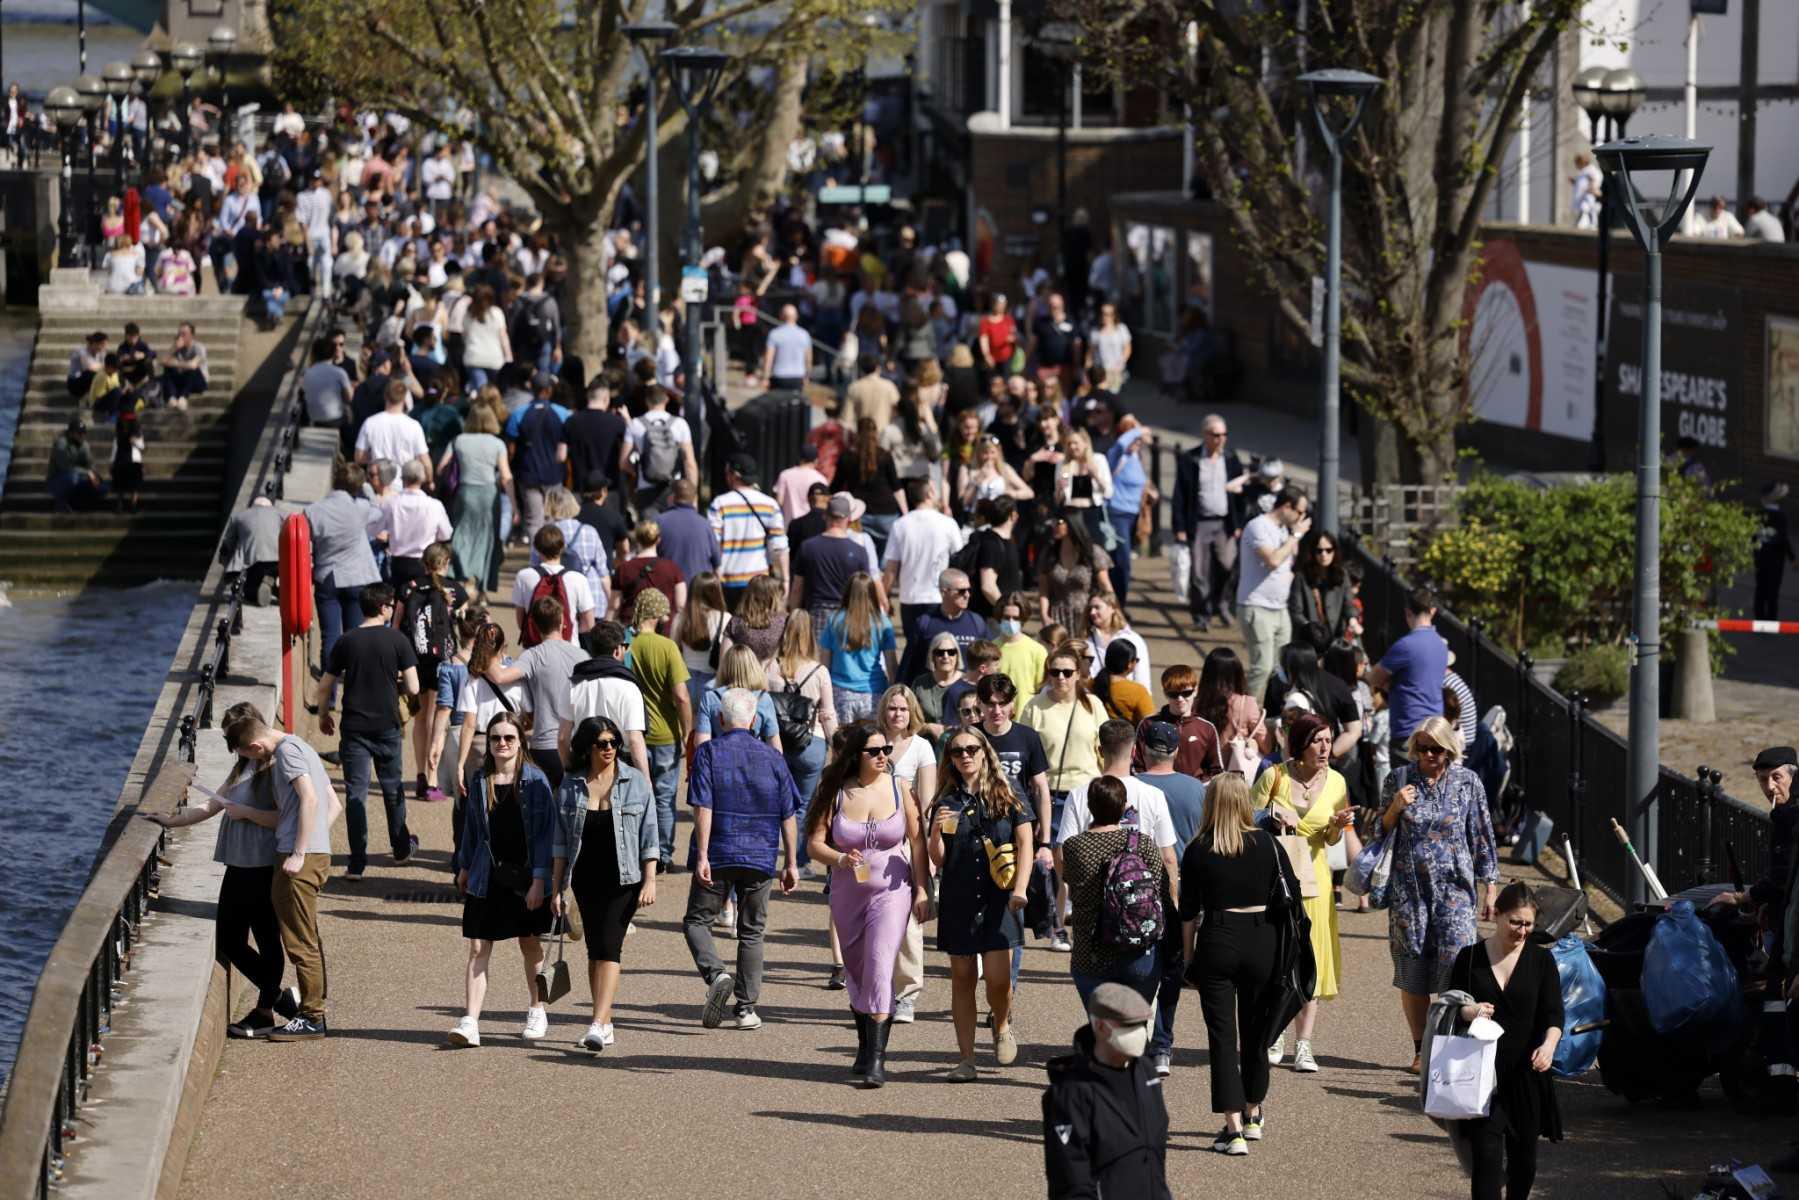 Crowds of people walk in the spring sunshine past Shakespeare's Globe theatre on the south bank of the River Thames in London on April 15. Photo: AFP